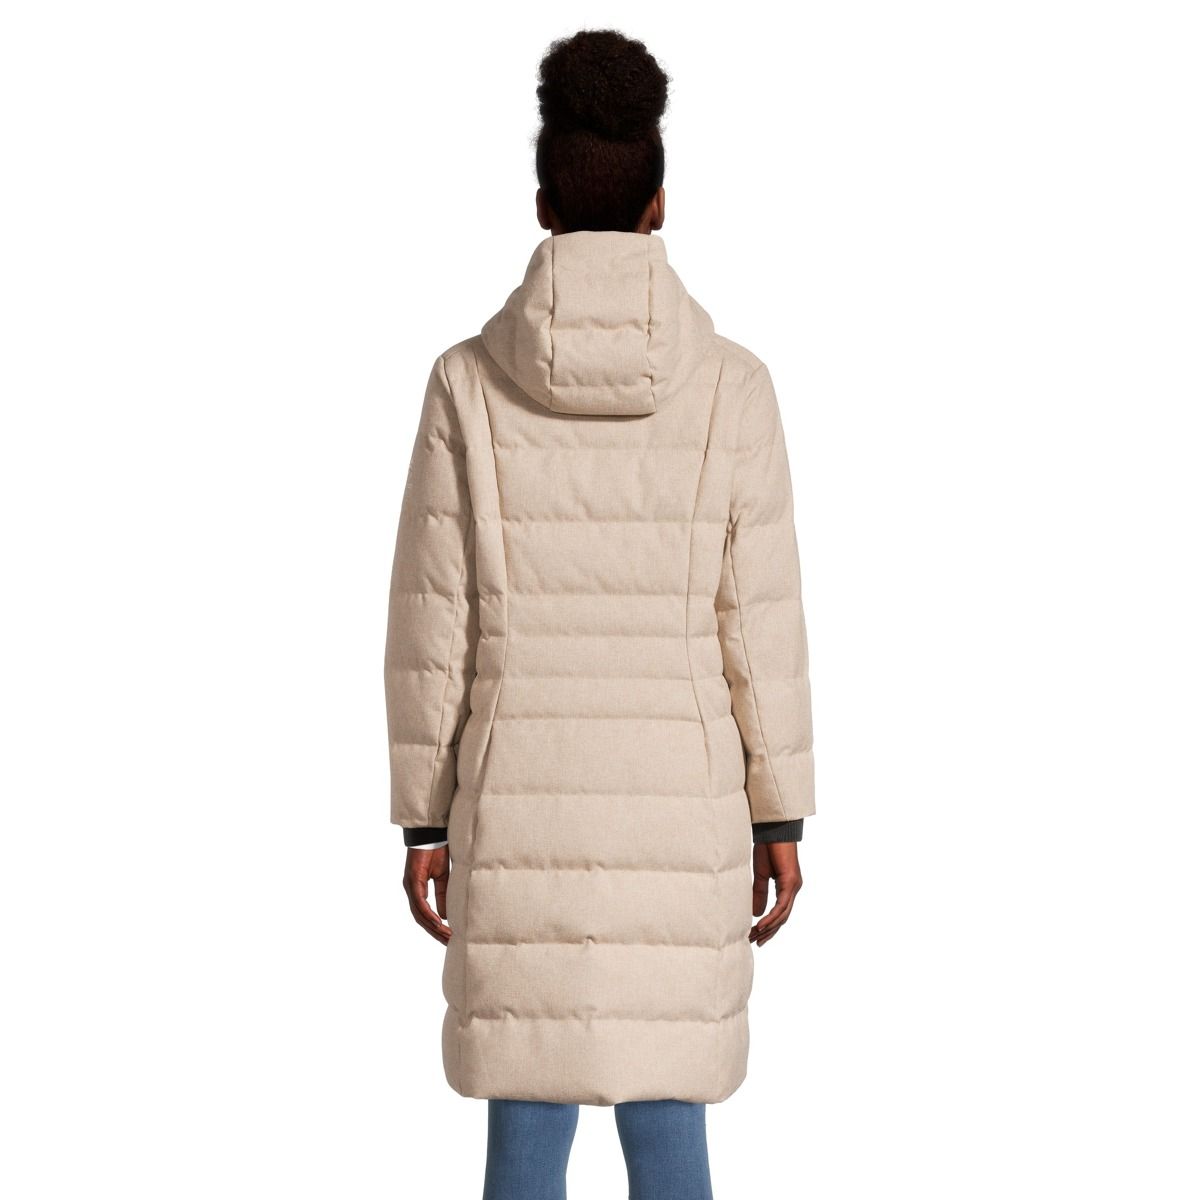 https://media-www.atmosphere.ca/product/div-03-softgoods/dpt-76-outerwear/sdpt-02-womens/333443276/woods-women-s-lipsett-baffled-silver-mink-xs--67a59bc9-2378-4009-a885-fe615cb7fdbd-jpgrendition.jpg?imdensity=1&imwidth=1244&impolicy=mZoom